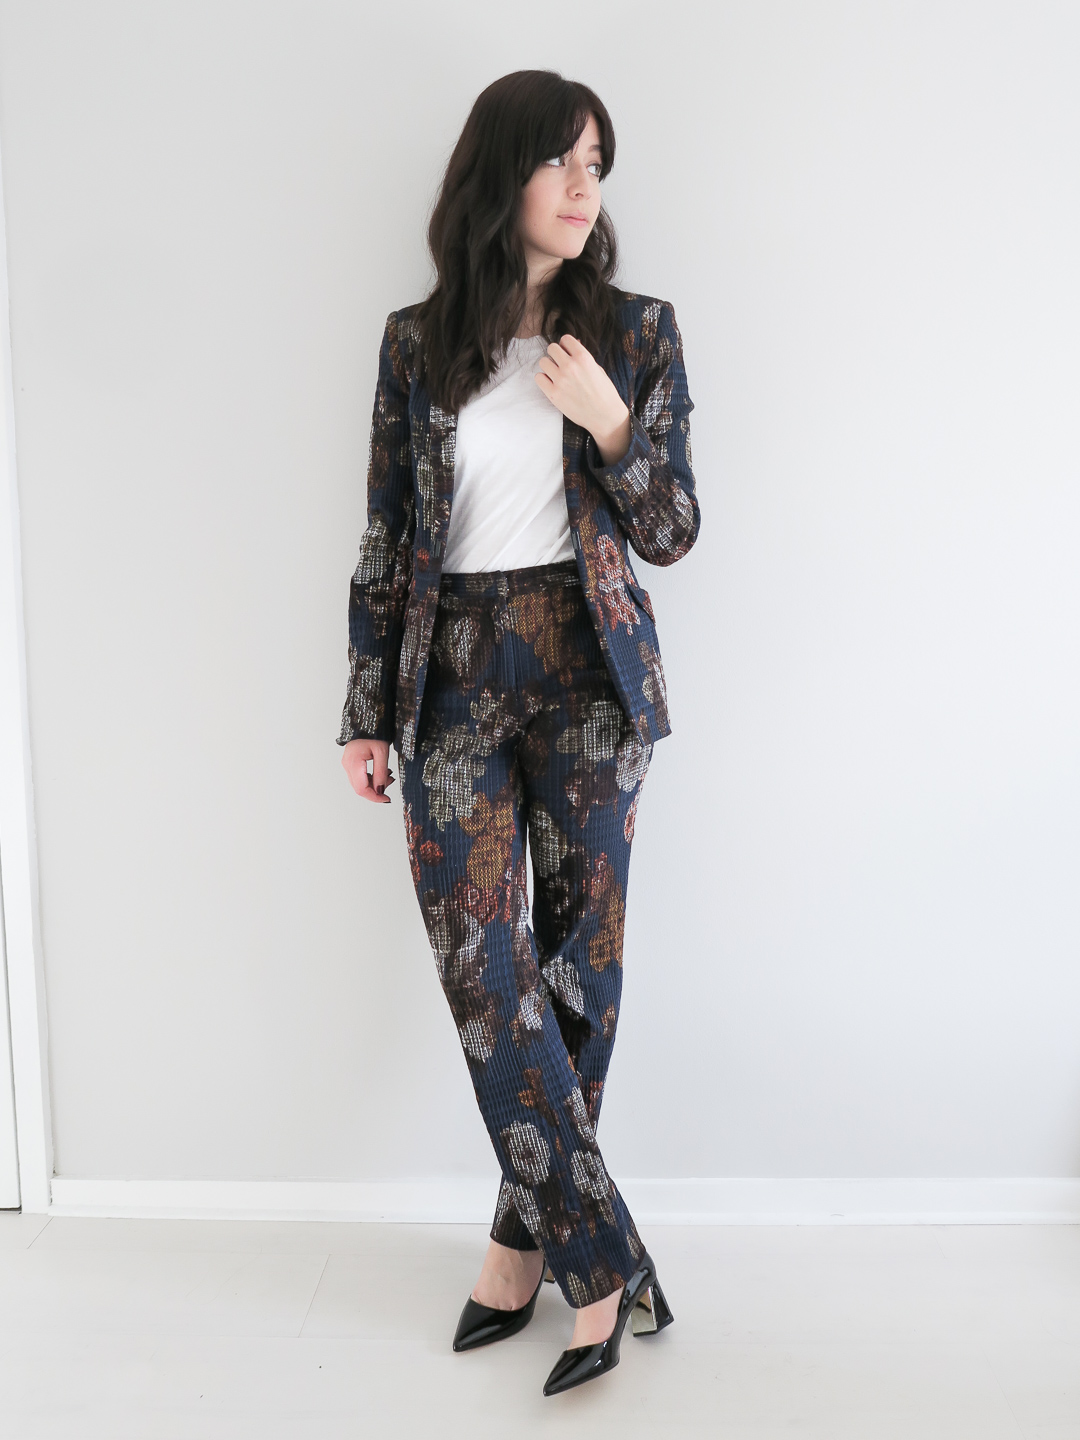 How To Style a Womens Floral Suit | Curiously Conscious